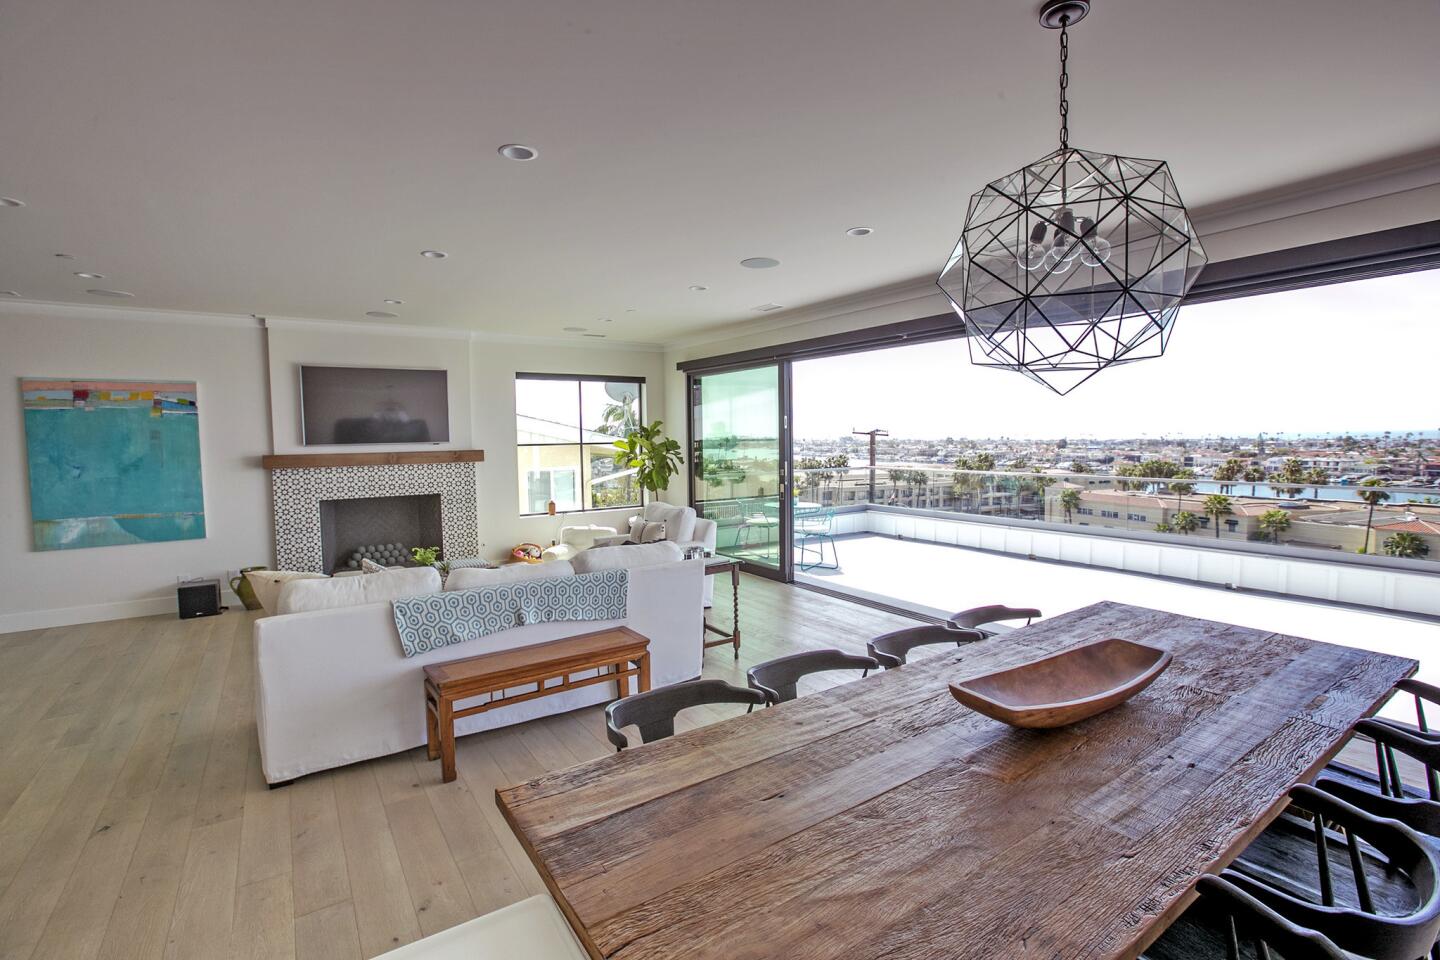 The view from the main room of Trever and Chelsea Gregory's home overlooks Newport Bay. The home will be on display for the Newport Harbor Home Tour.